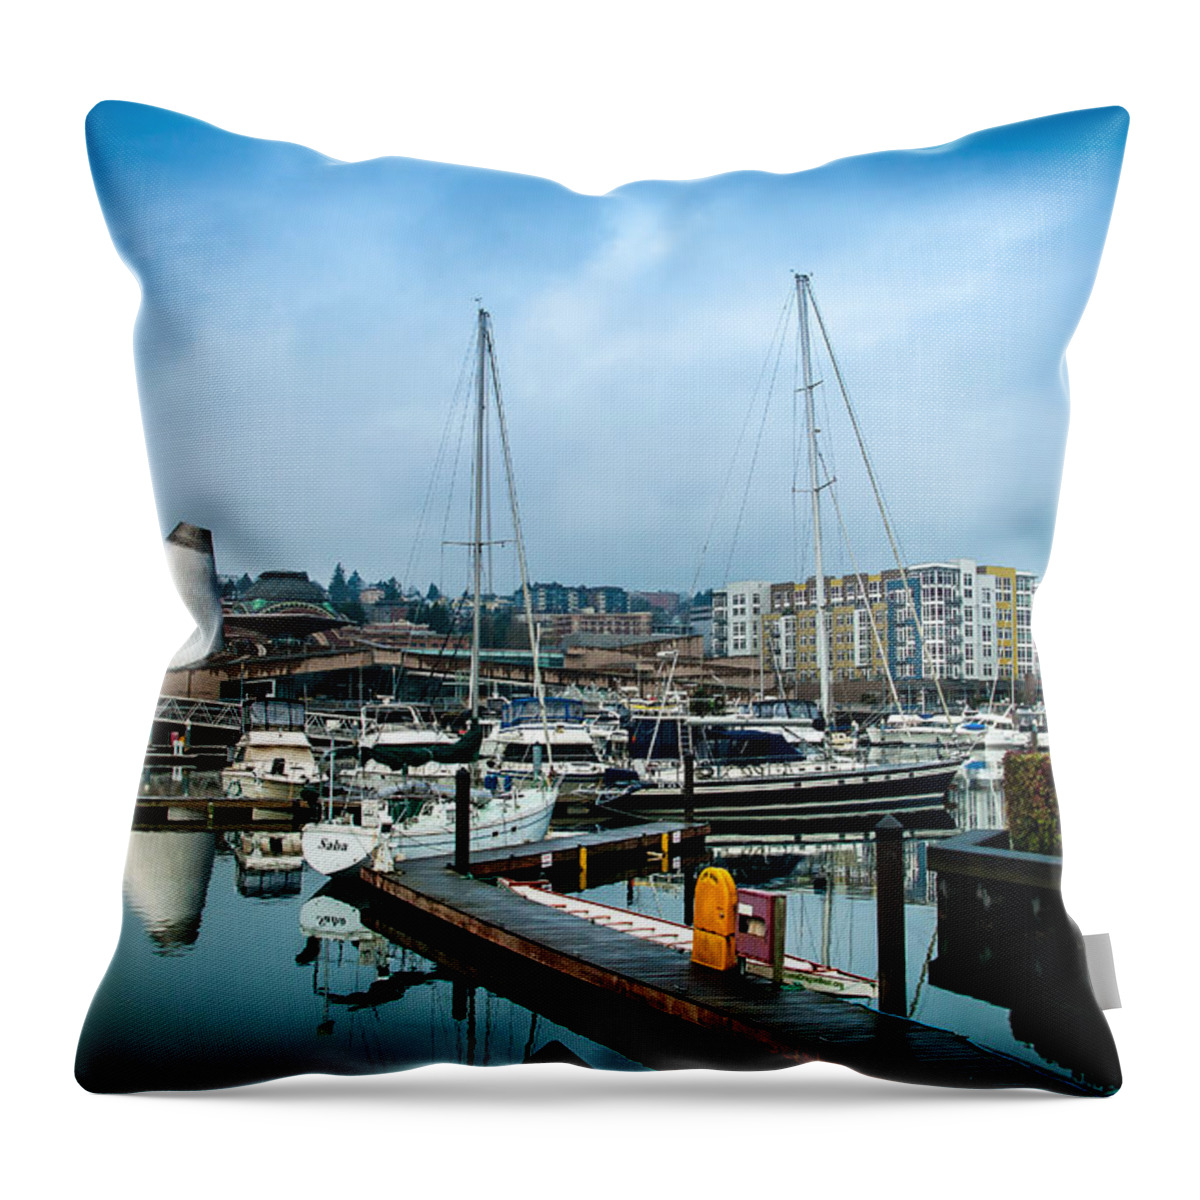 Glass Museum Throw Pillow featuring the photograph Glass Museum by Cassius Johnson